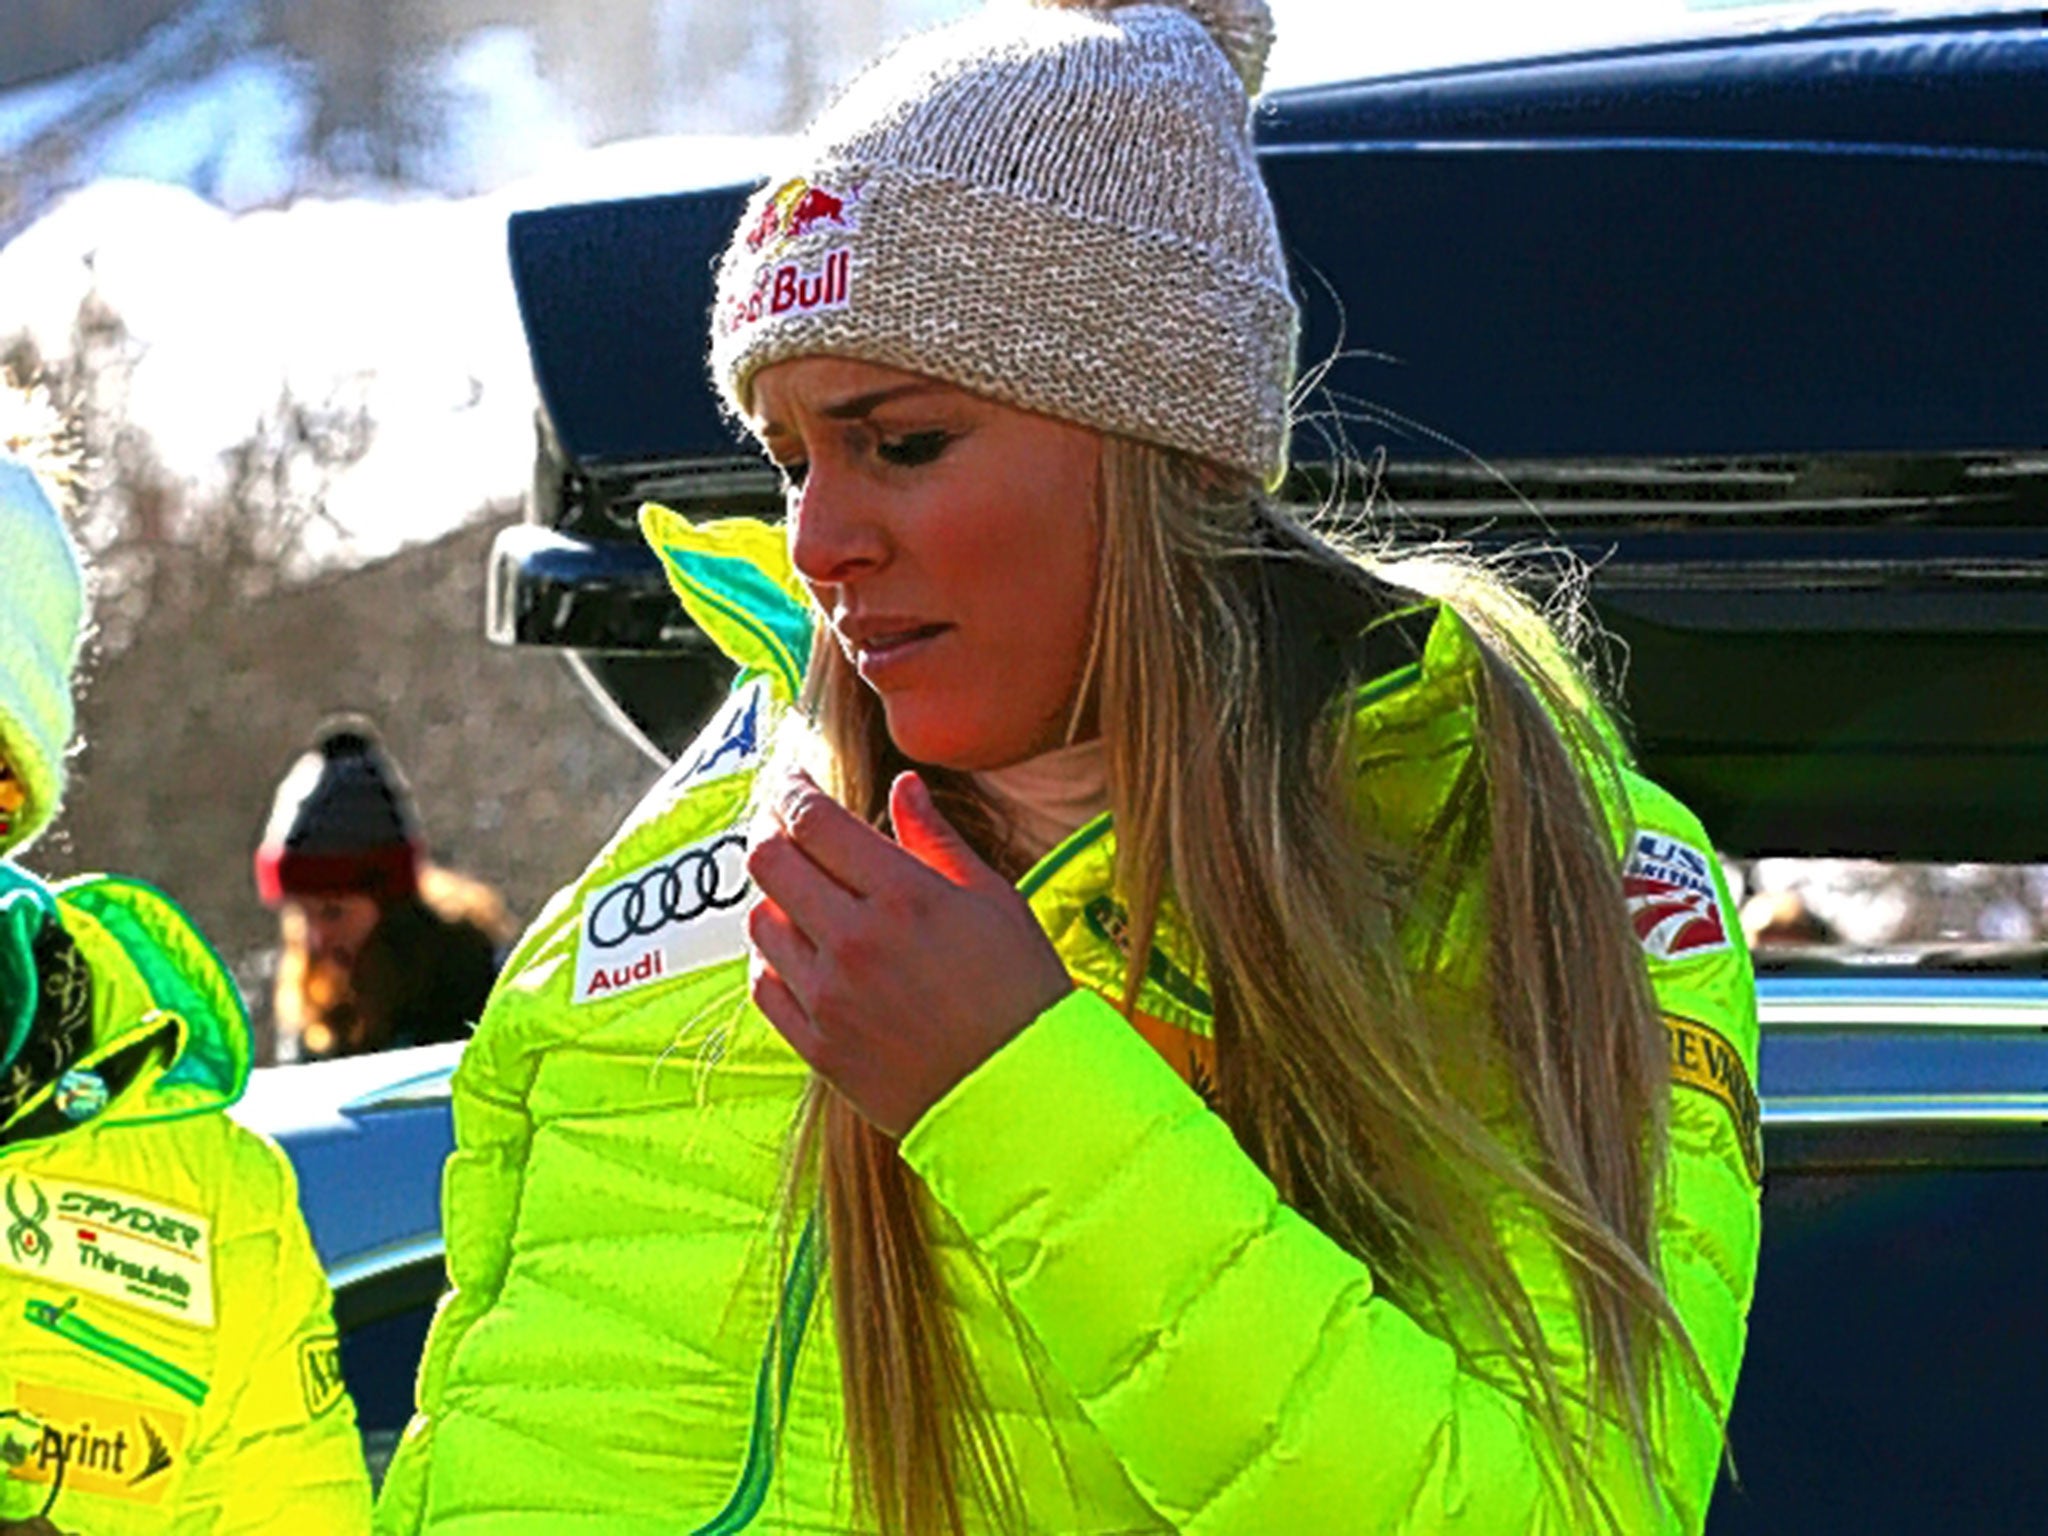 A disappointed Lindsey Vonn, with her right arm strapped up, leaves the course at Val d’Isère after crashing in the Super-G